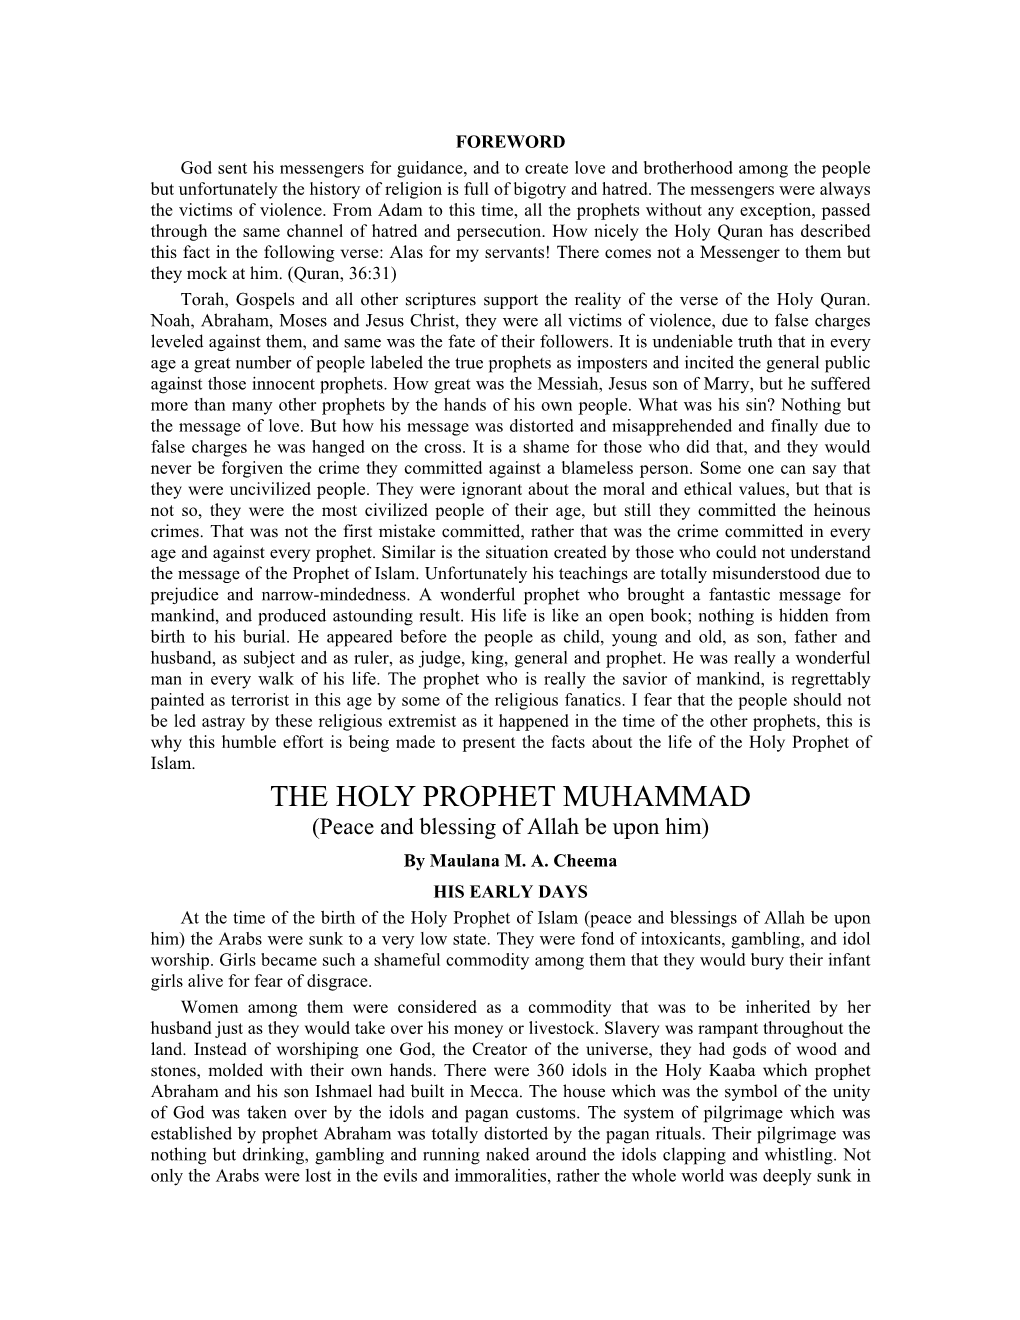 THE HOLY PROPHET MUHAMMAD (Peace and Blessing of Allah Be Upon Him) by Maulana M